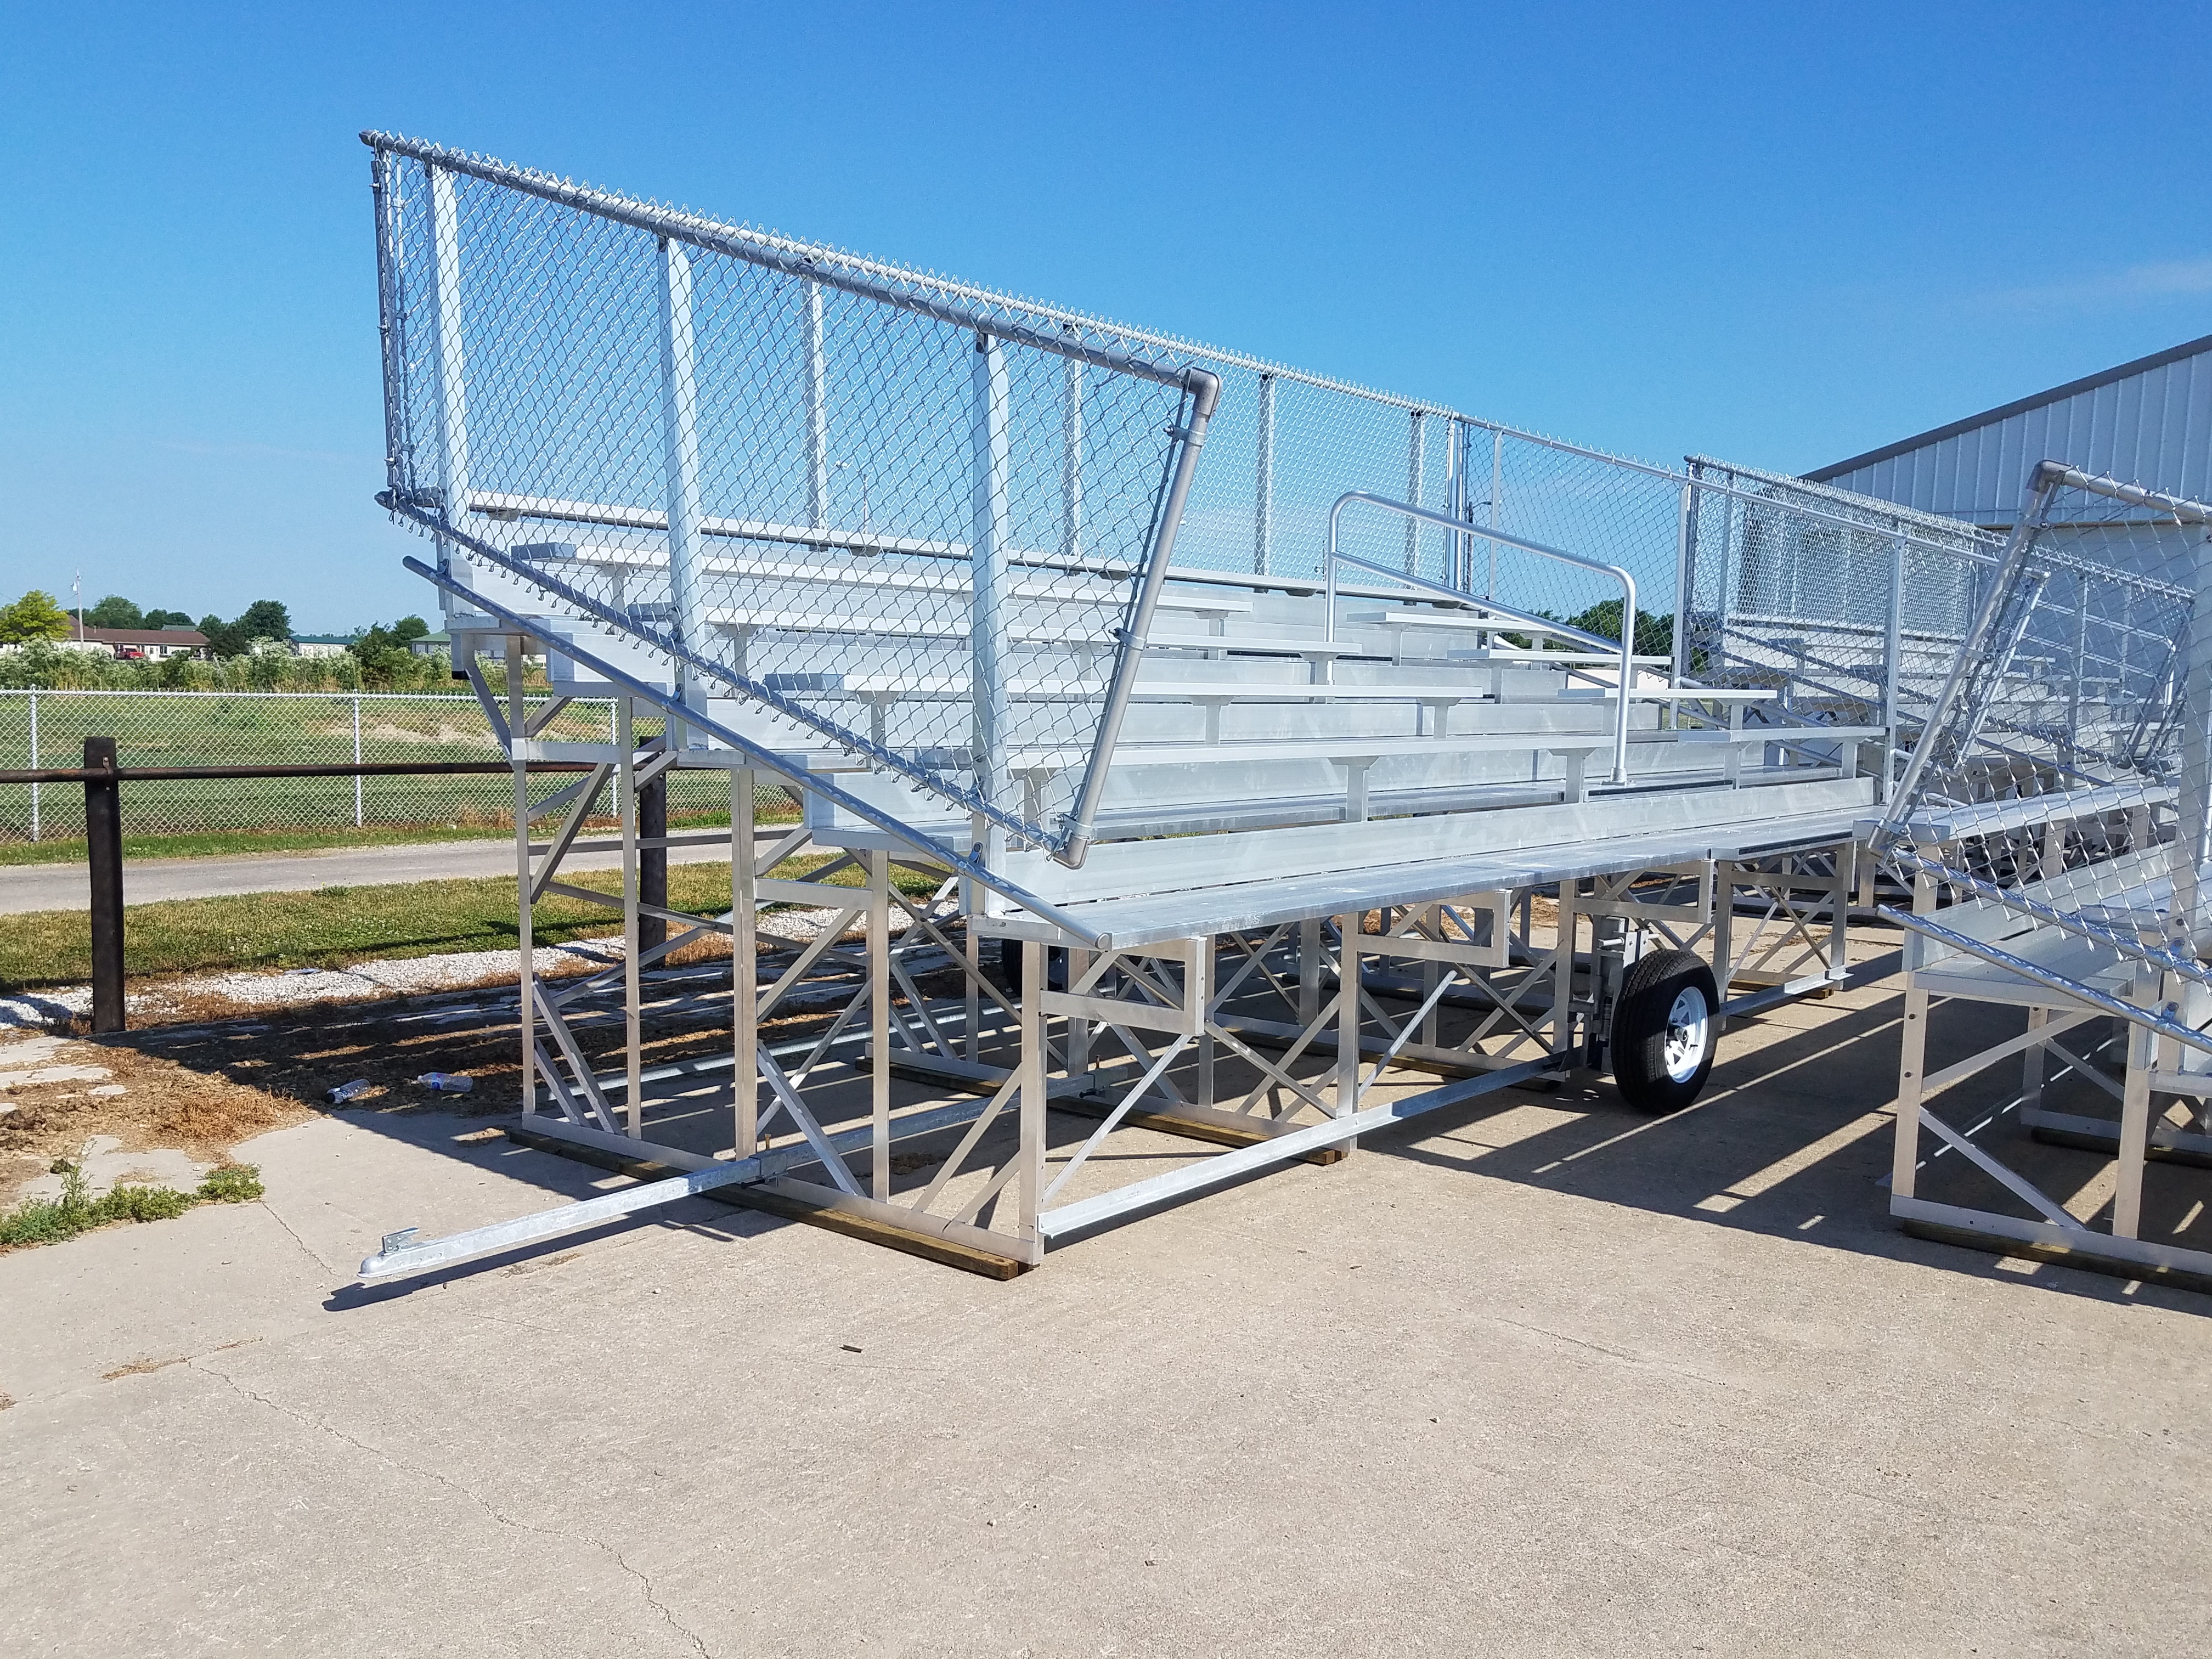 Portable Bleachers Help Provide Spectator Seating At One Of The Most Popular County Fairs in Illinois